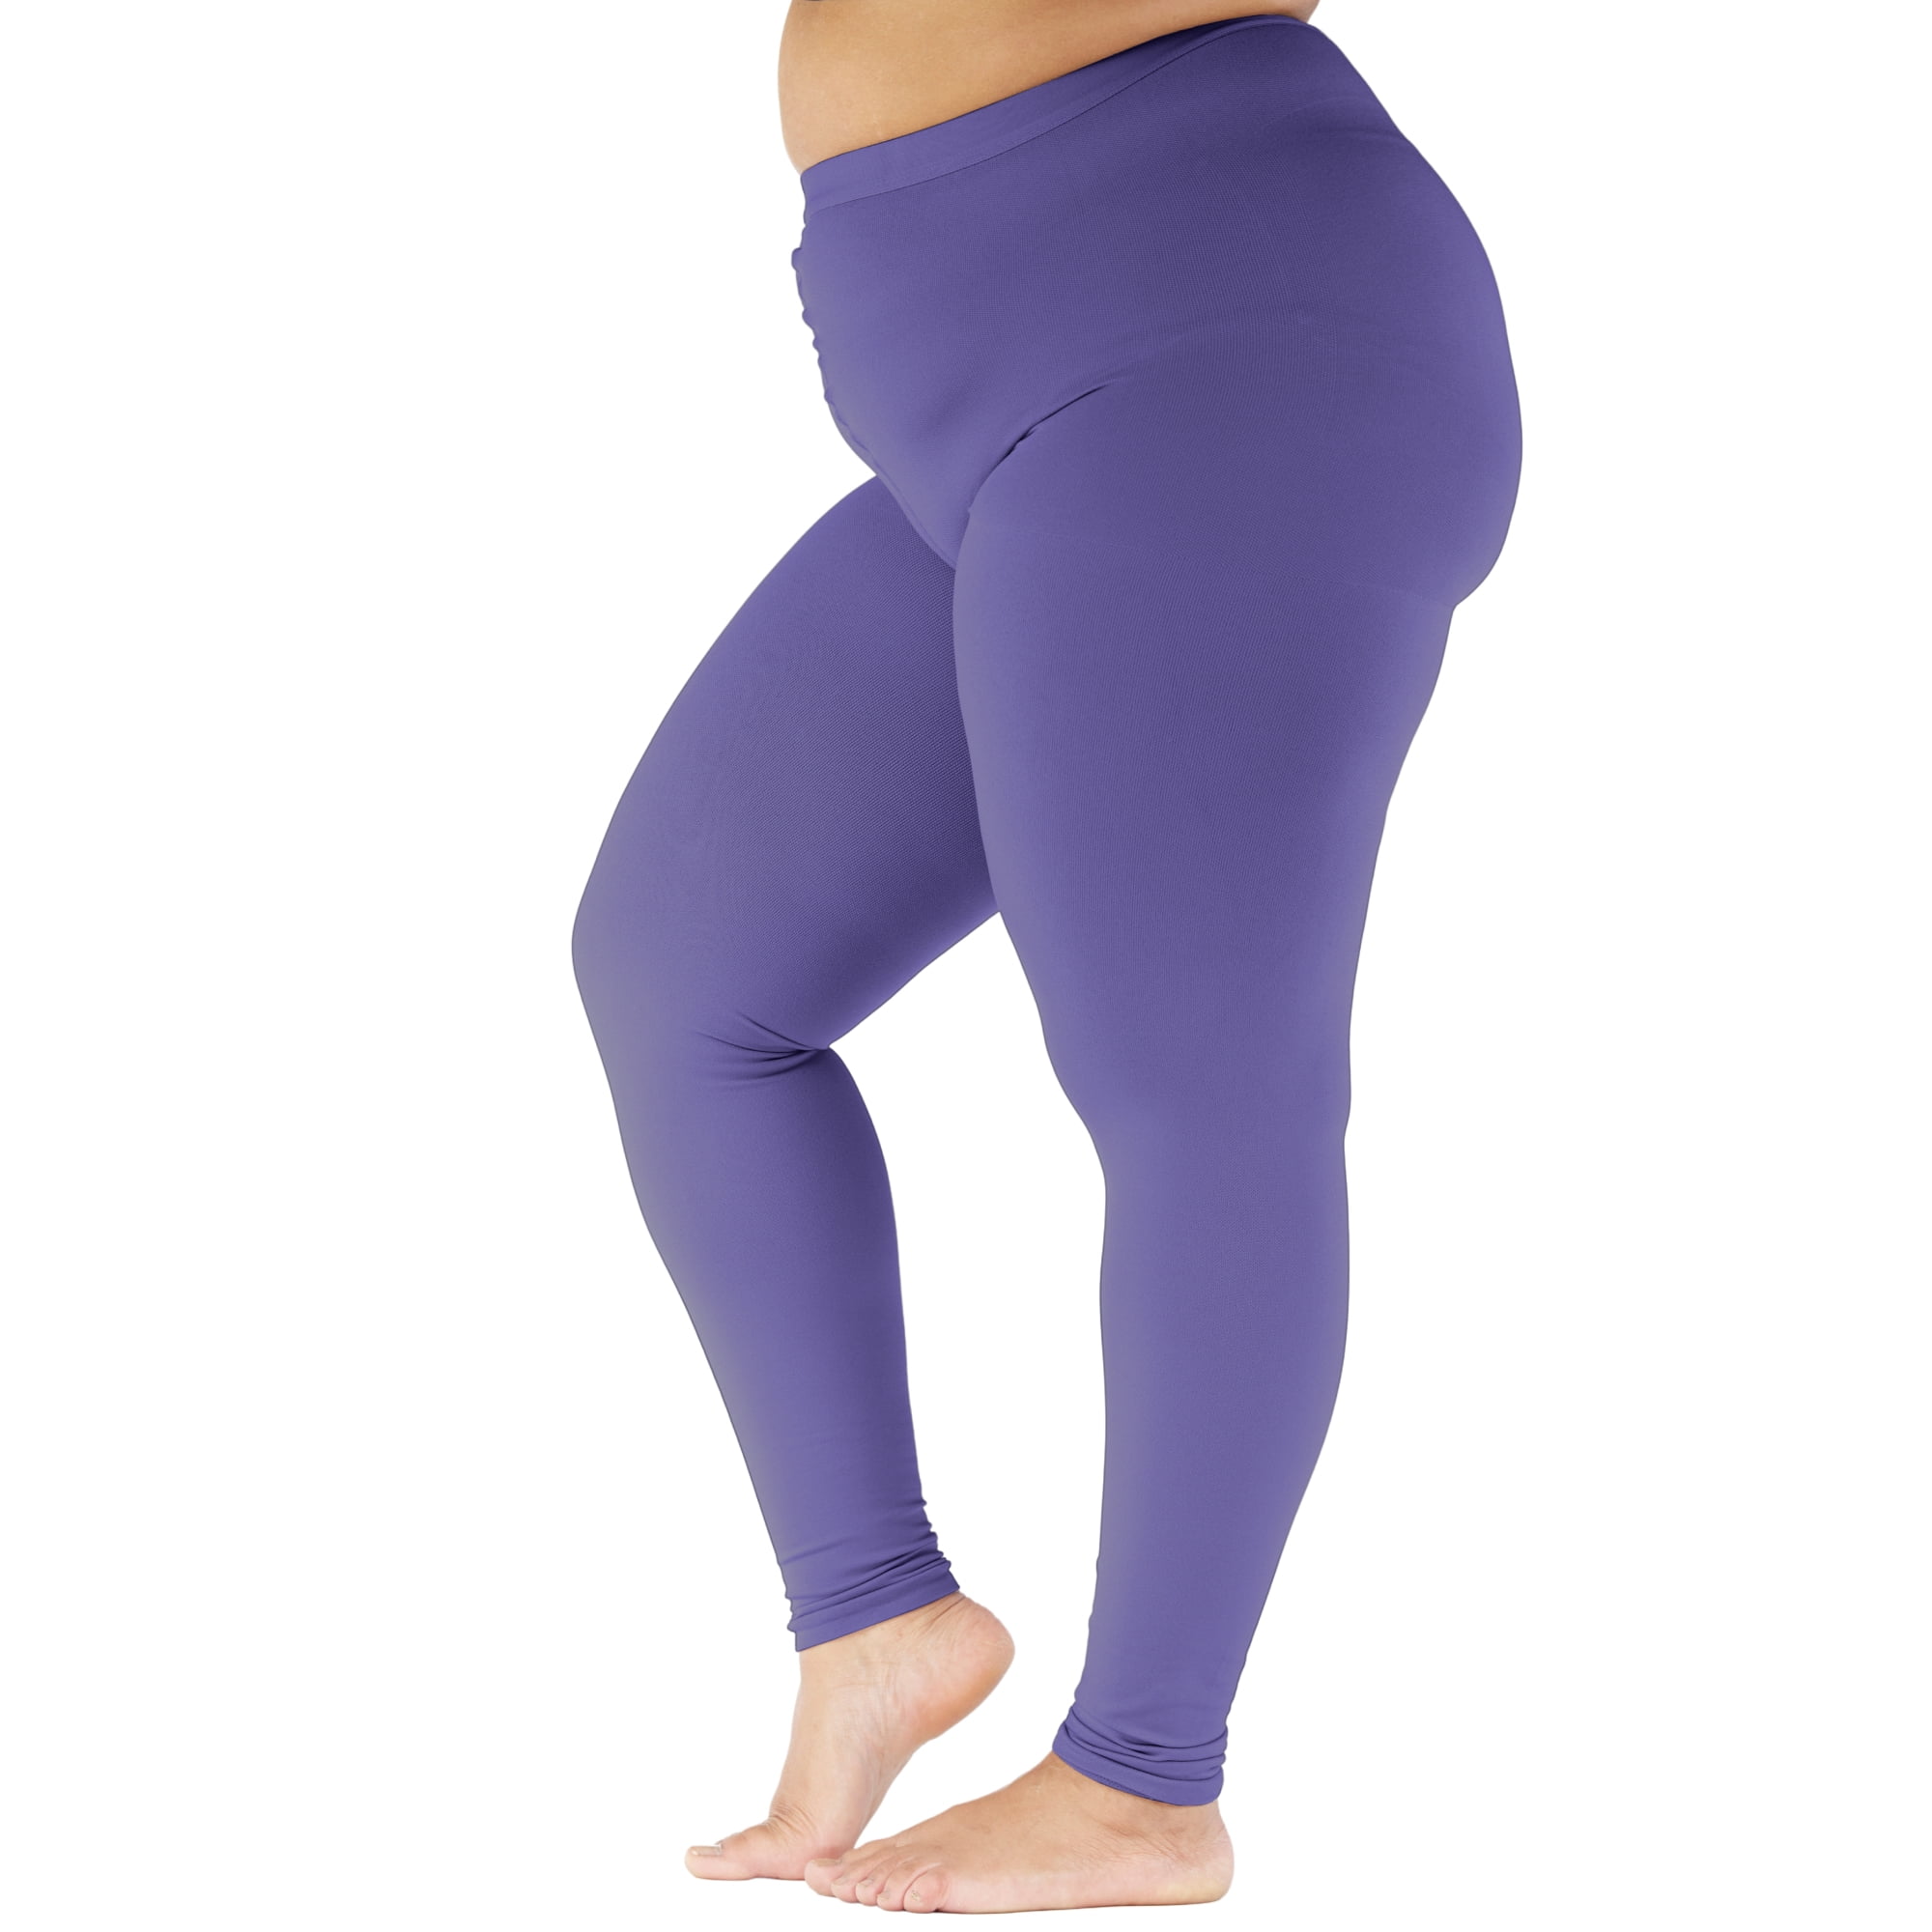 3XL Extra Wide Compression Leggings for Swelling 20-30mmHg - Purple,  3X-Large